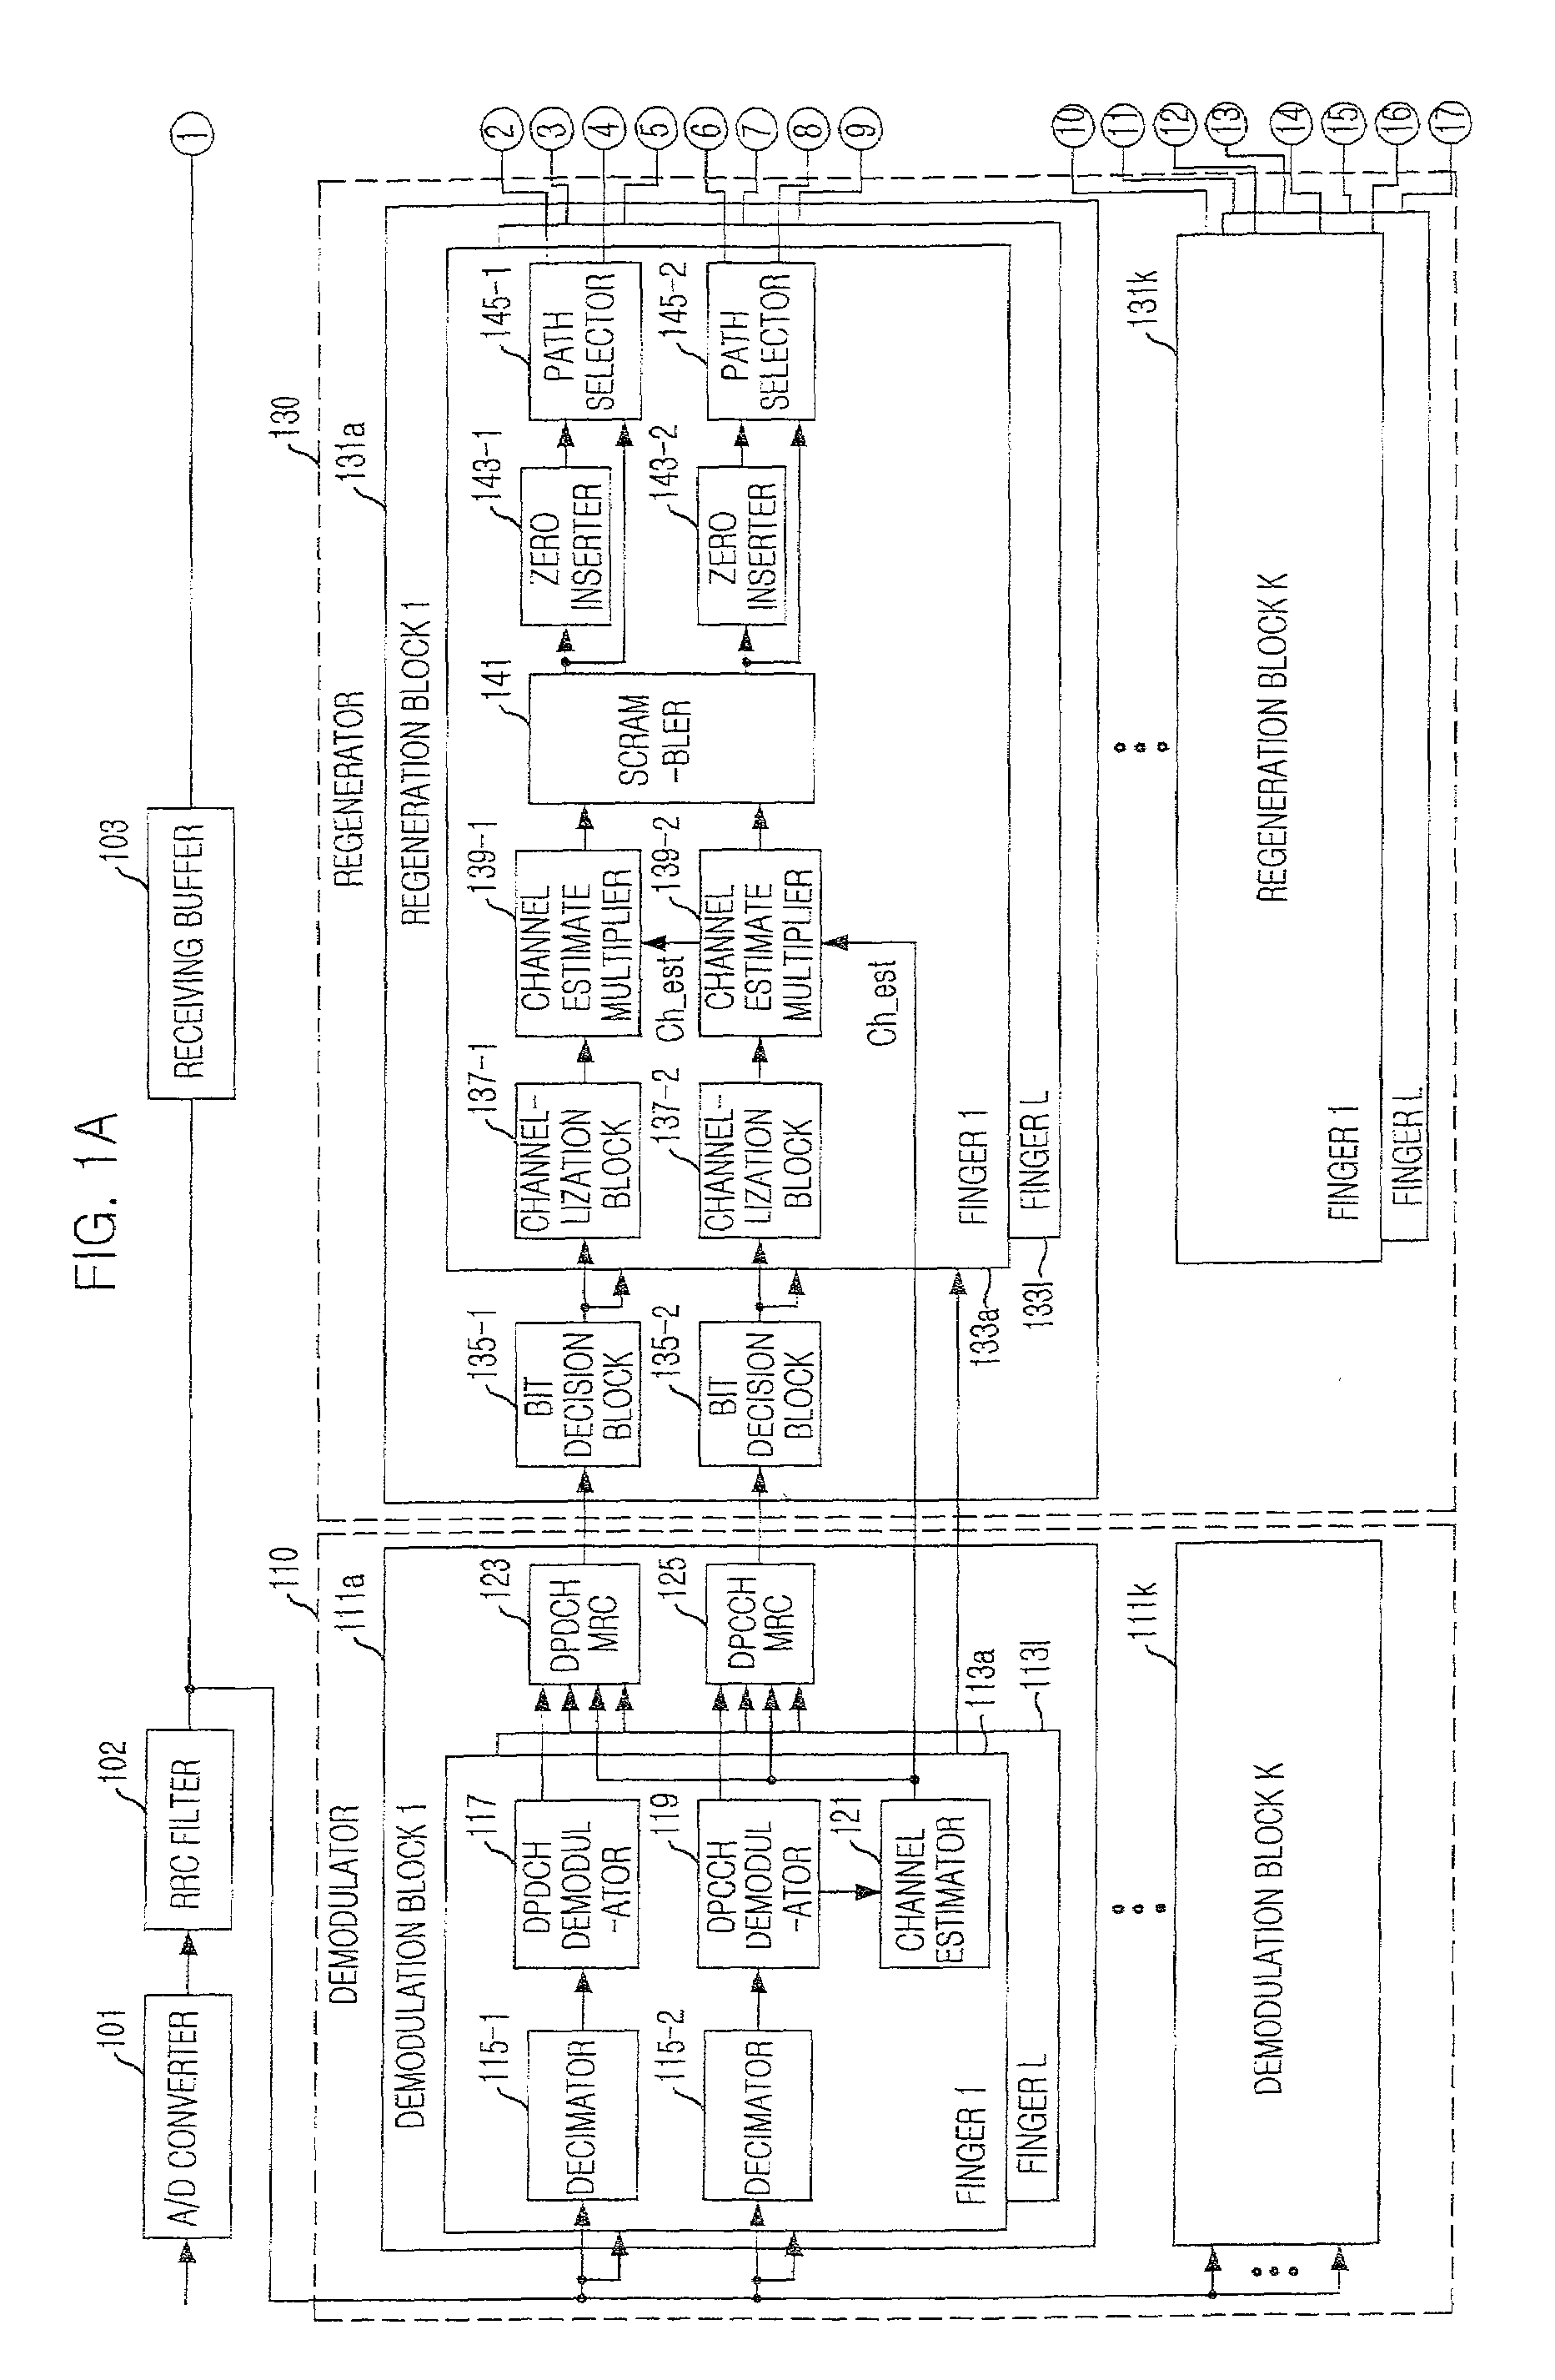 Interference cancellation receiver for use in a CDMA system